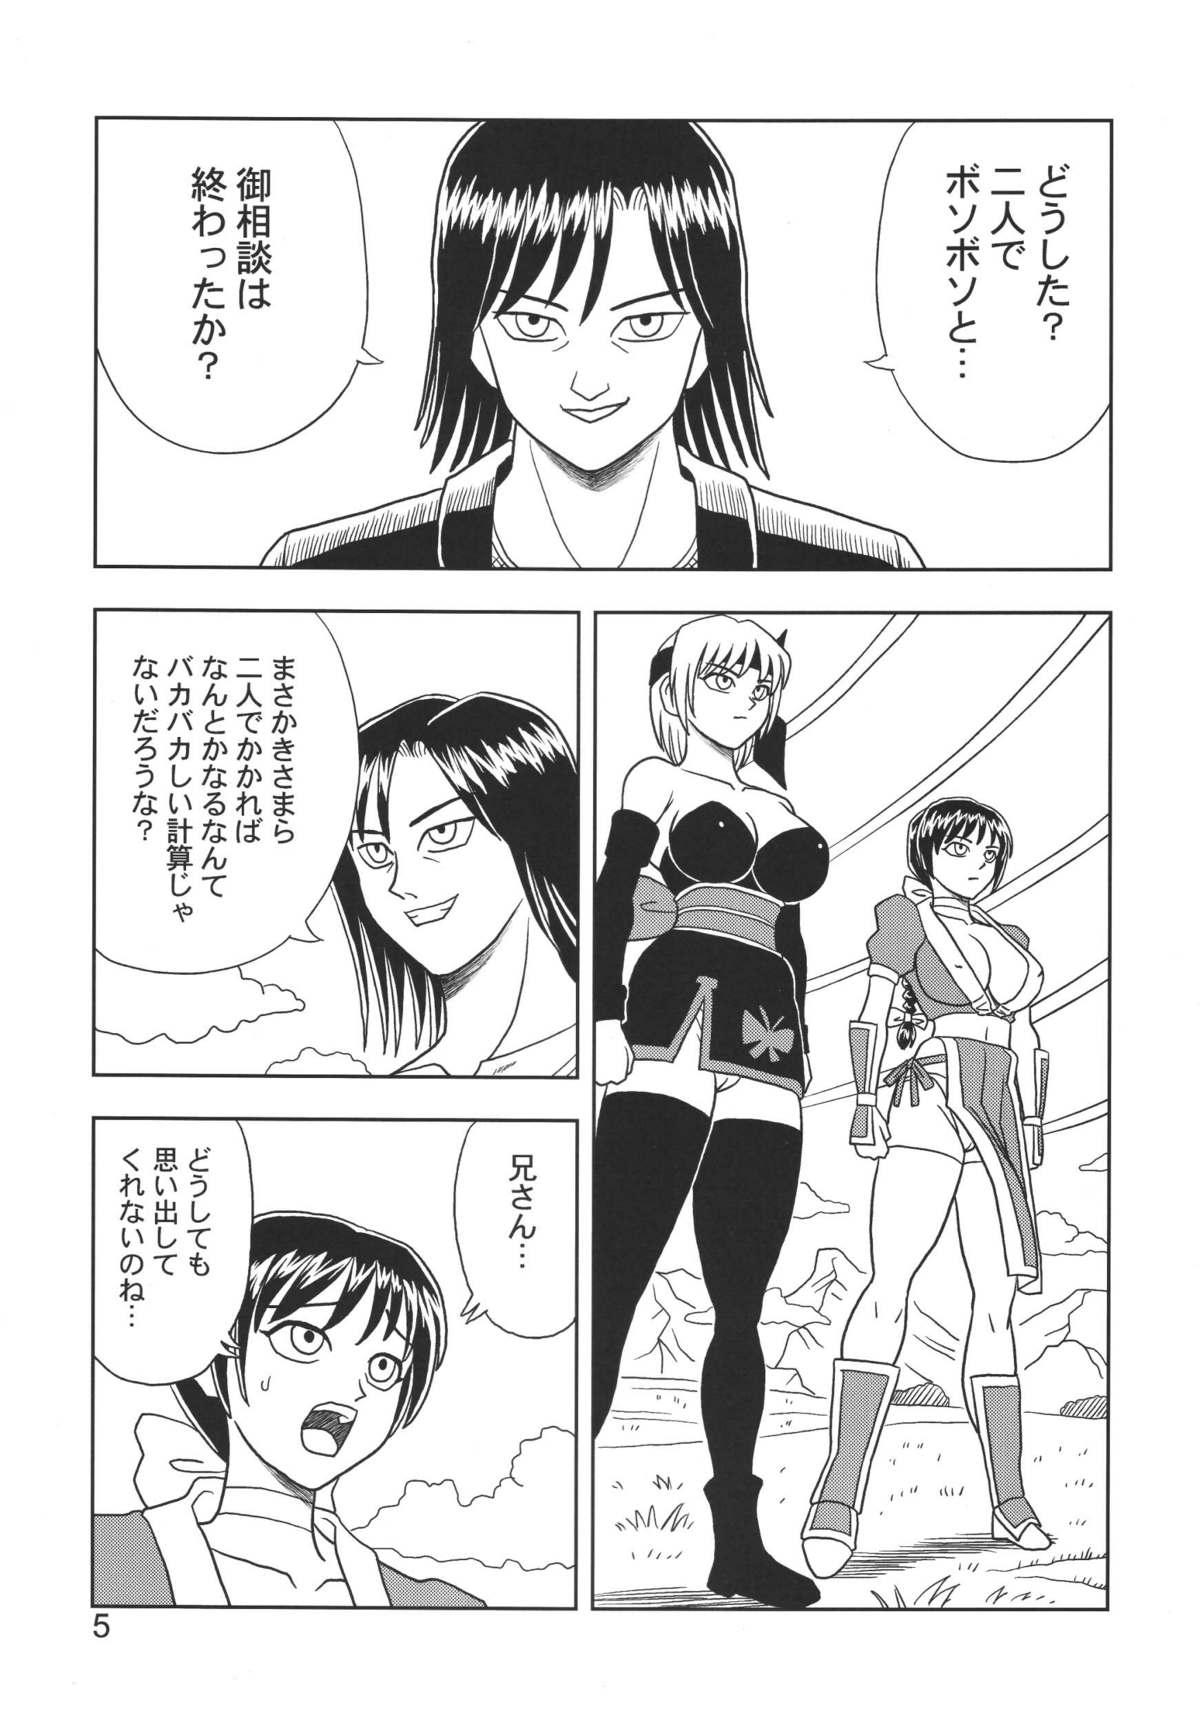 Rough Kasumi or Ayane - Dead or alive Abg - Page 5